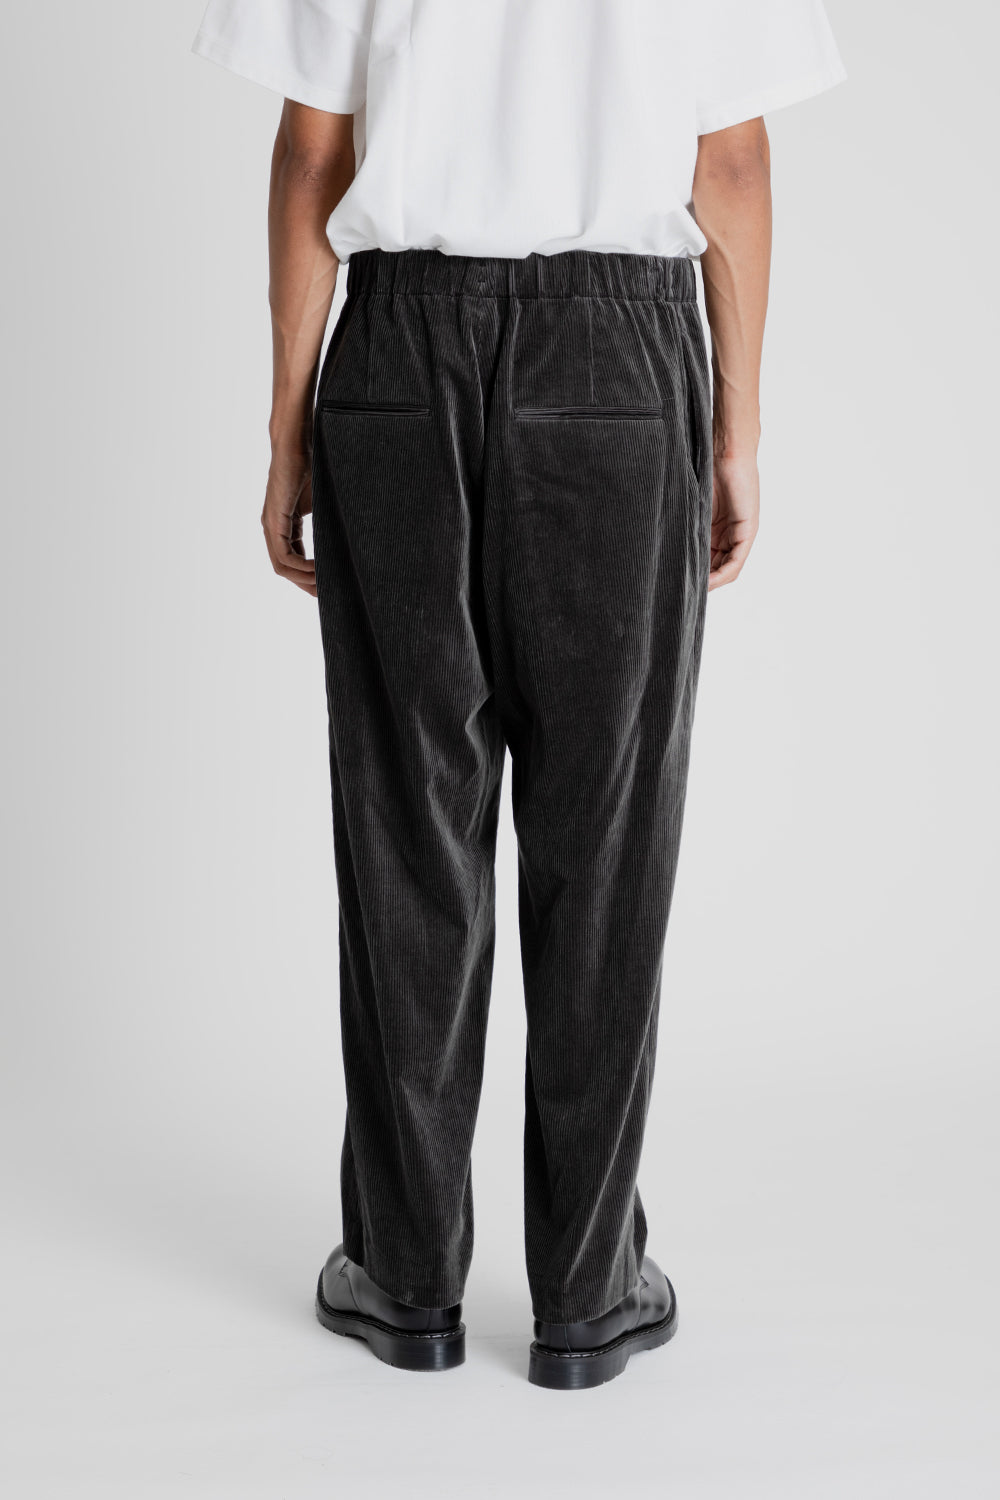 ATON Suvin Corduroy Easy Wide Pants in Charcoal Gray